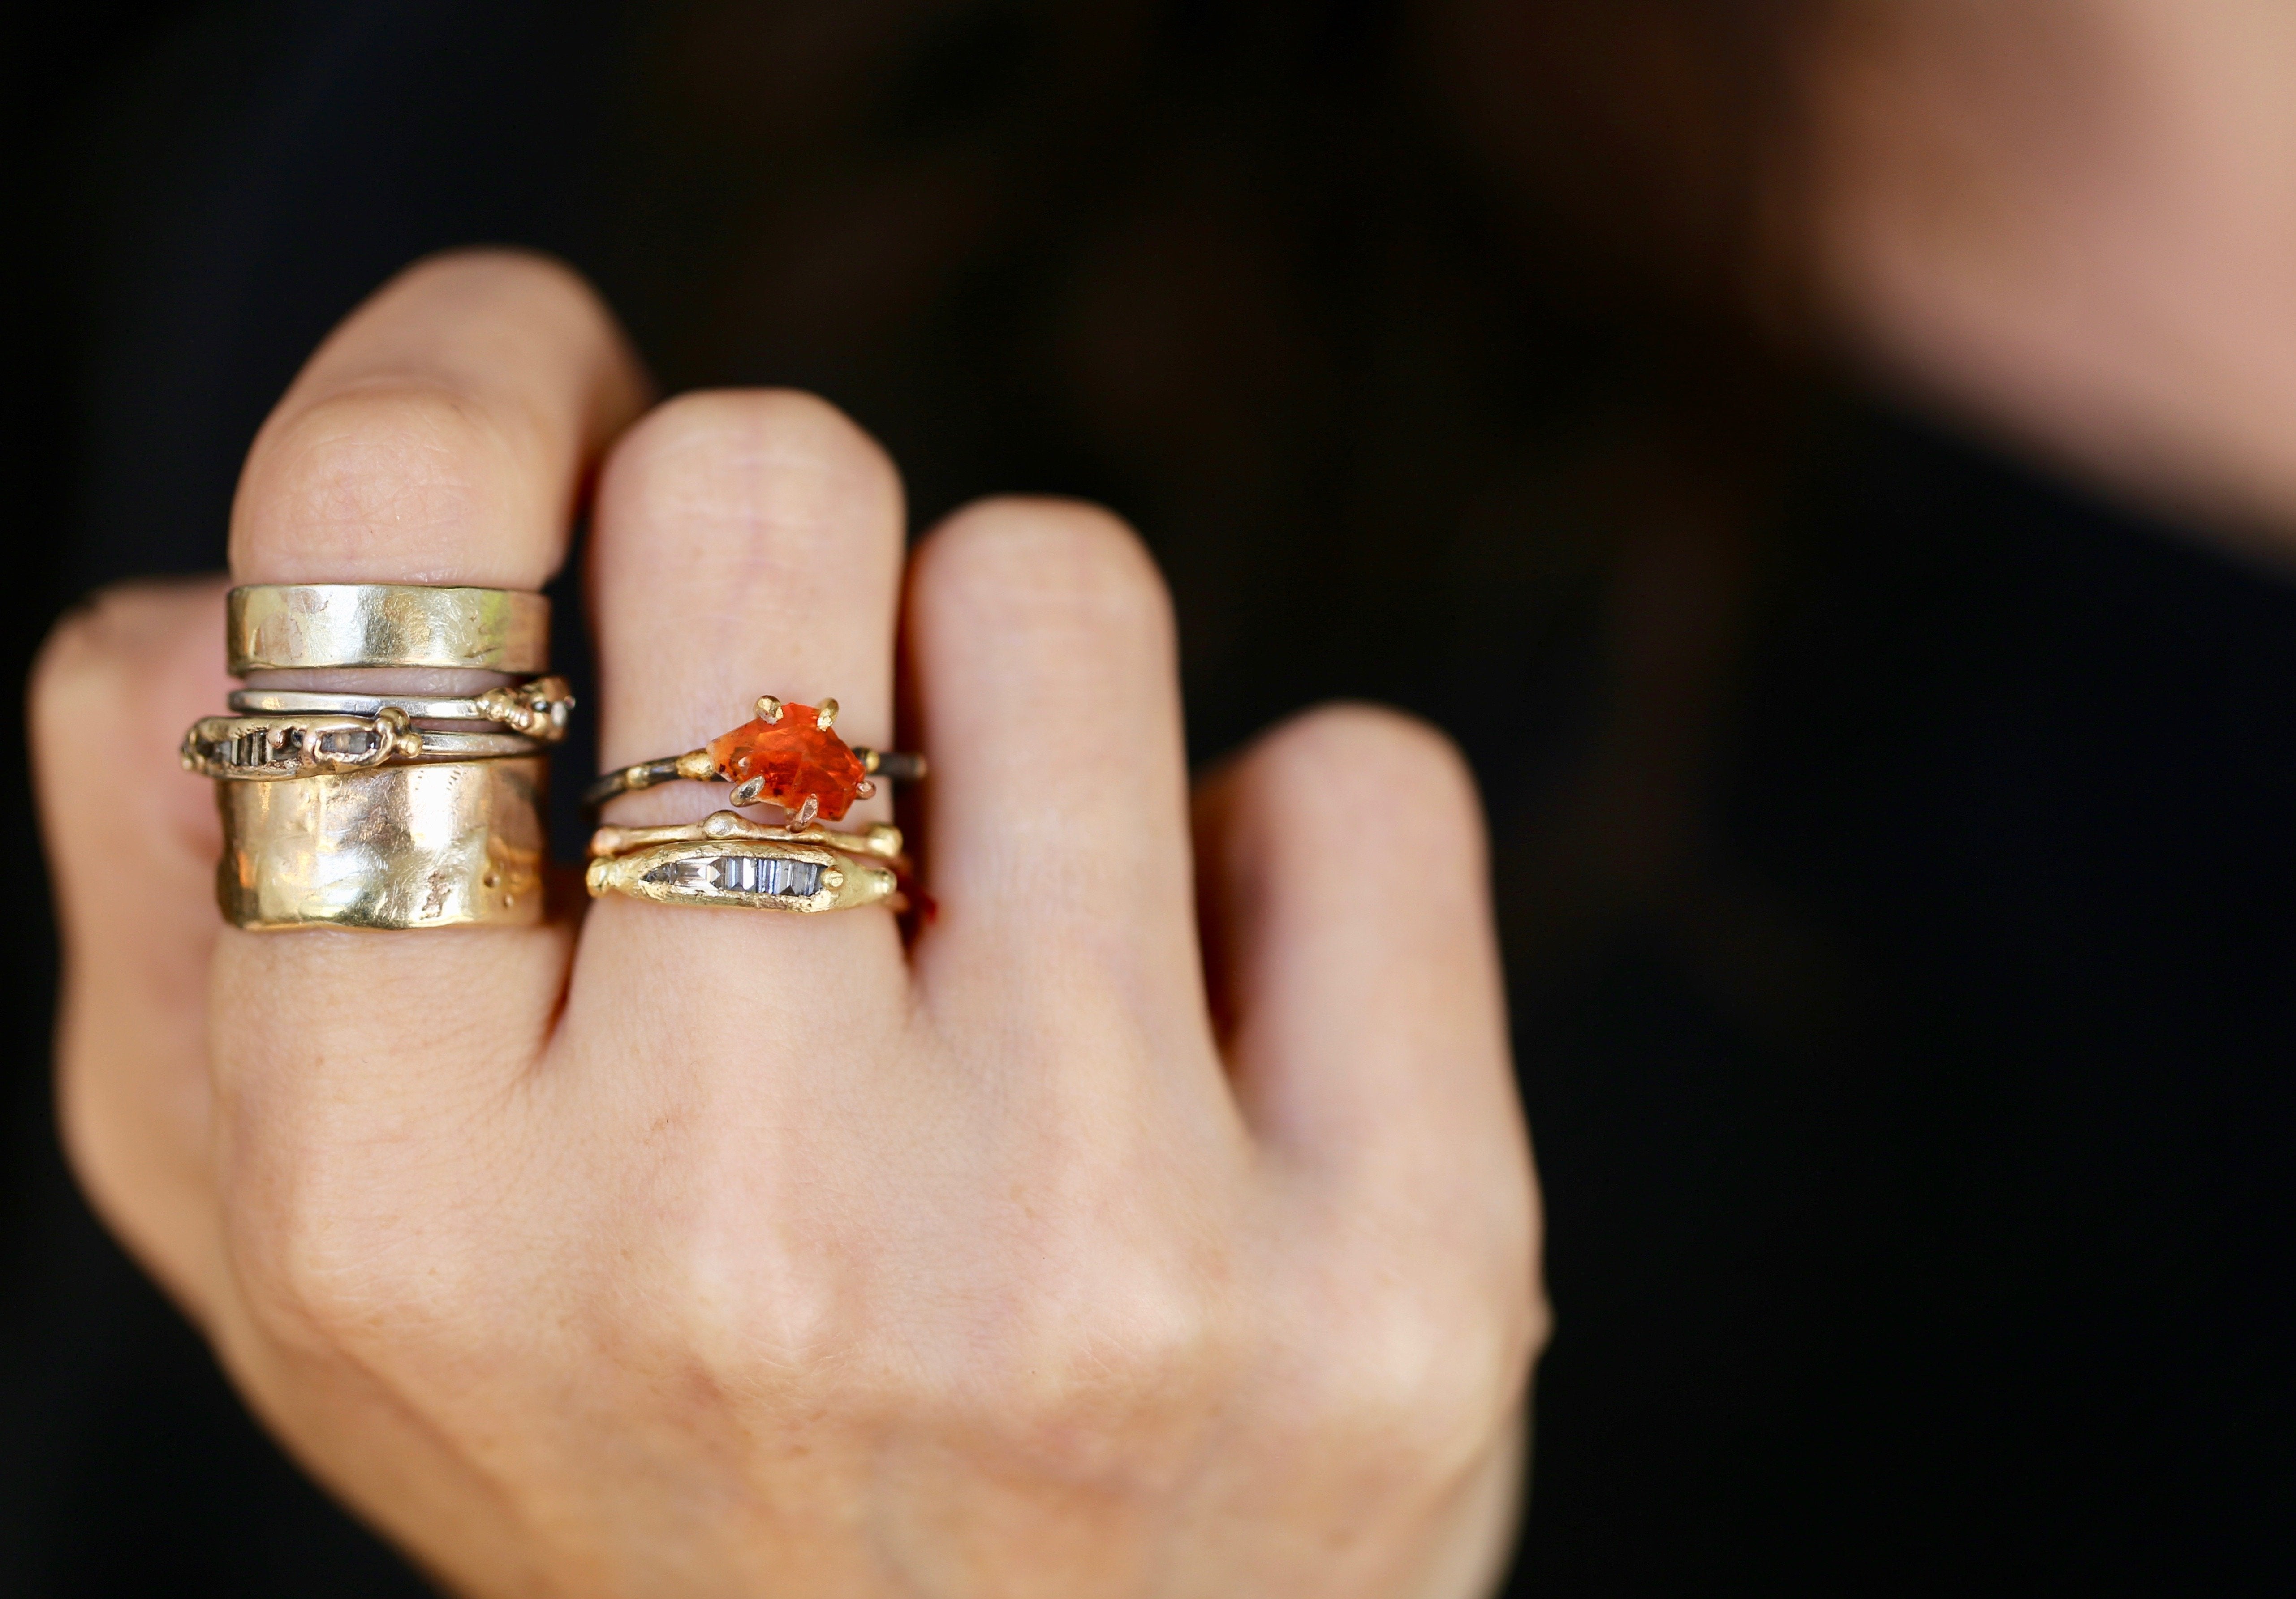 Mexican Fire Opal and baguette diamond rings on hand